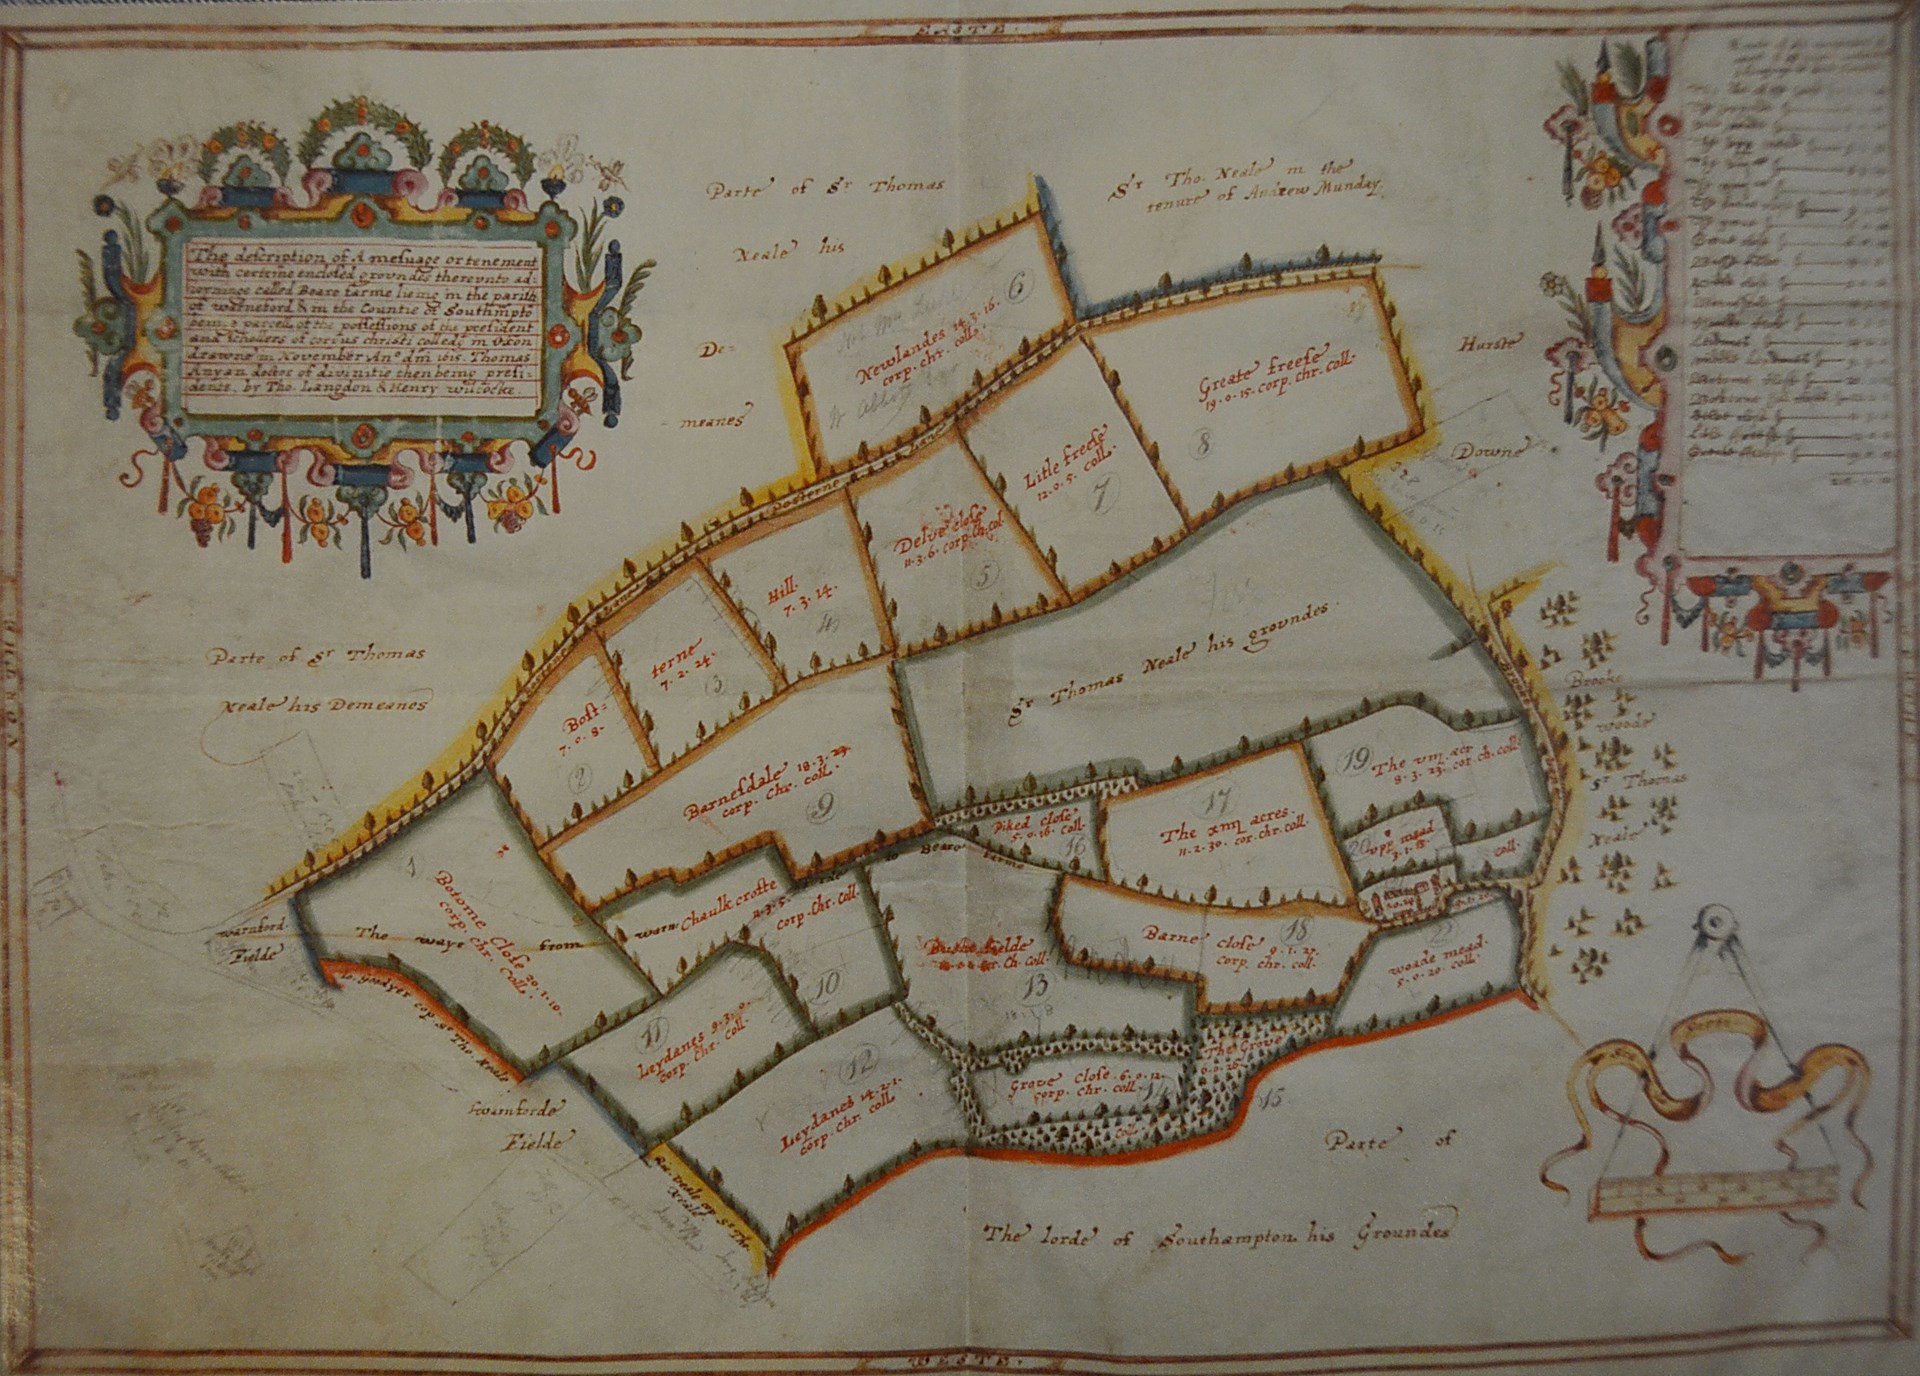 Langdon Map of Bere Farm from 1615